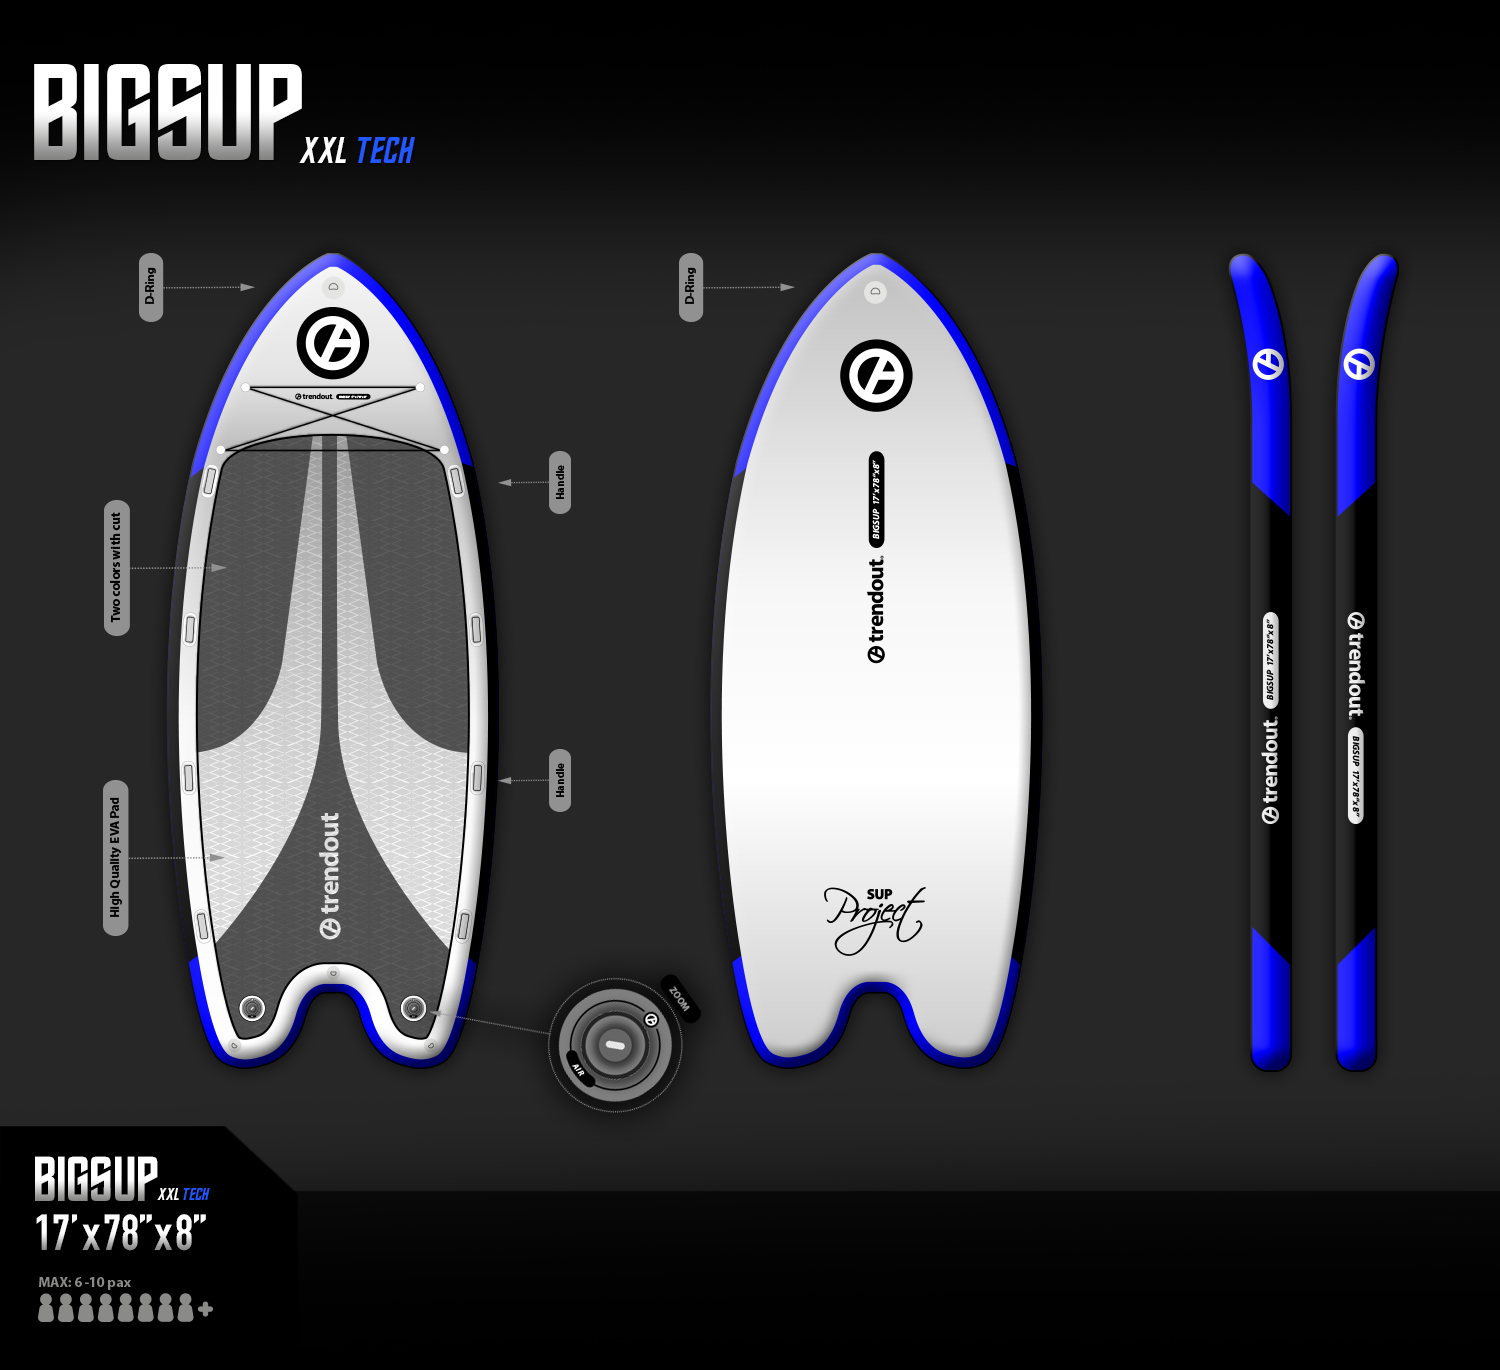 Trendout-bigsup-xxl-inflatable-paddleboard